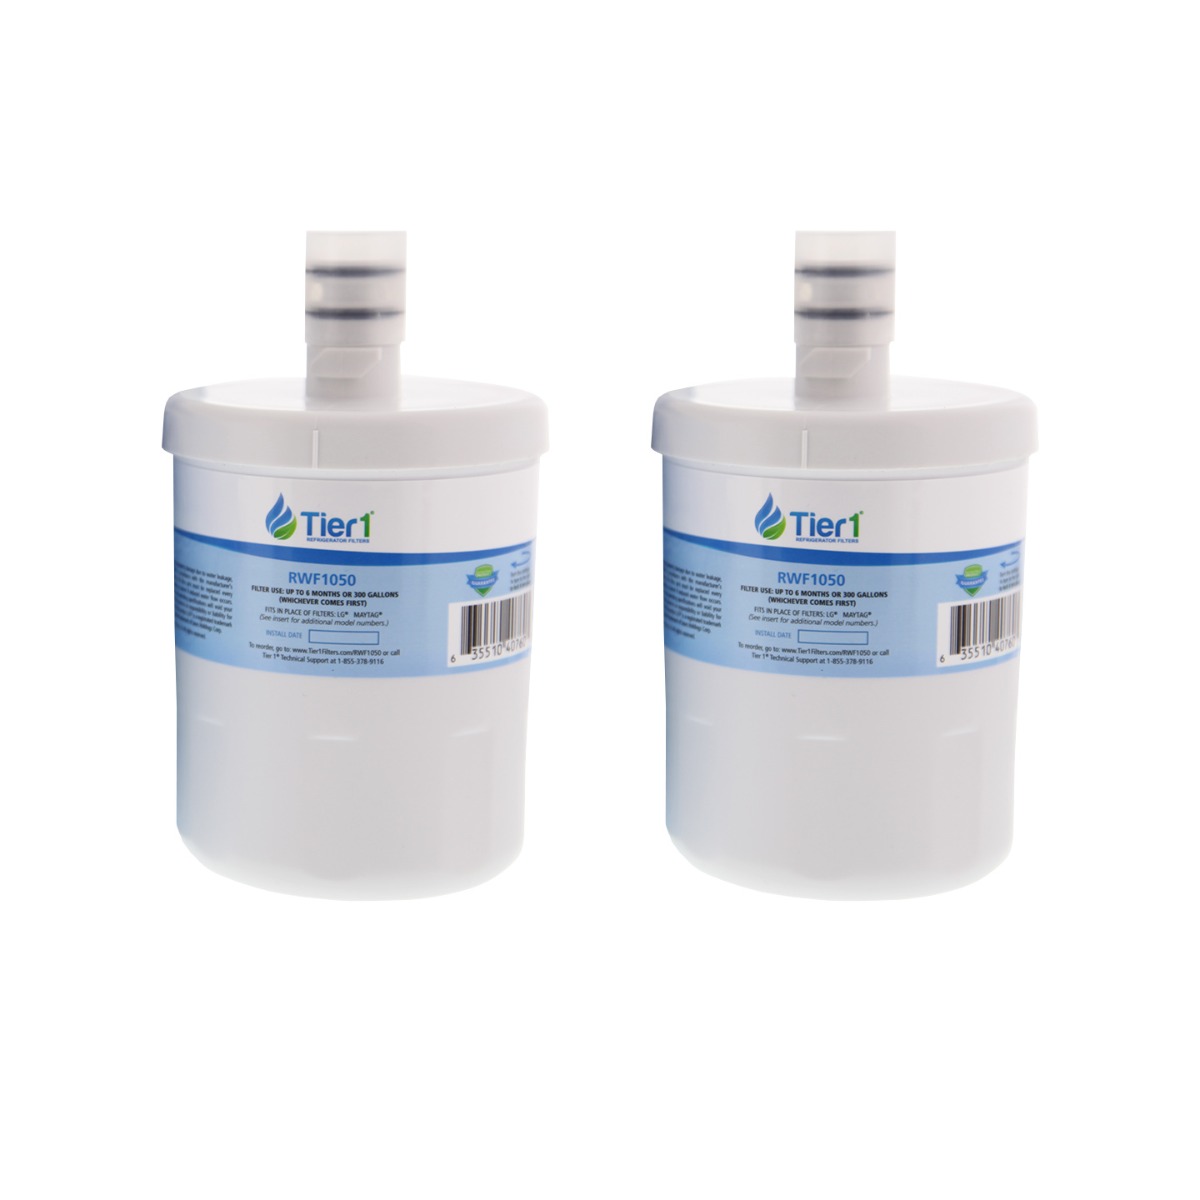 Tier1 LG LT500P 5231JA2002A ADQ72910907 Comparable Refrigerator Water Filter 2 Pack